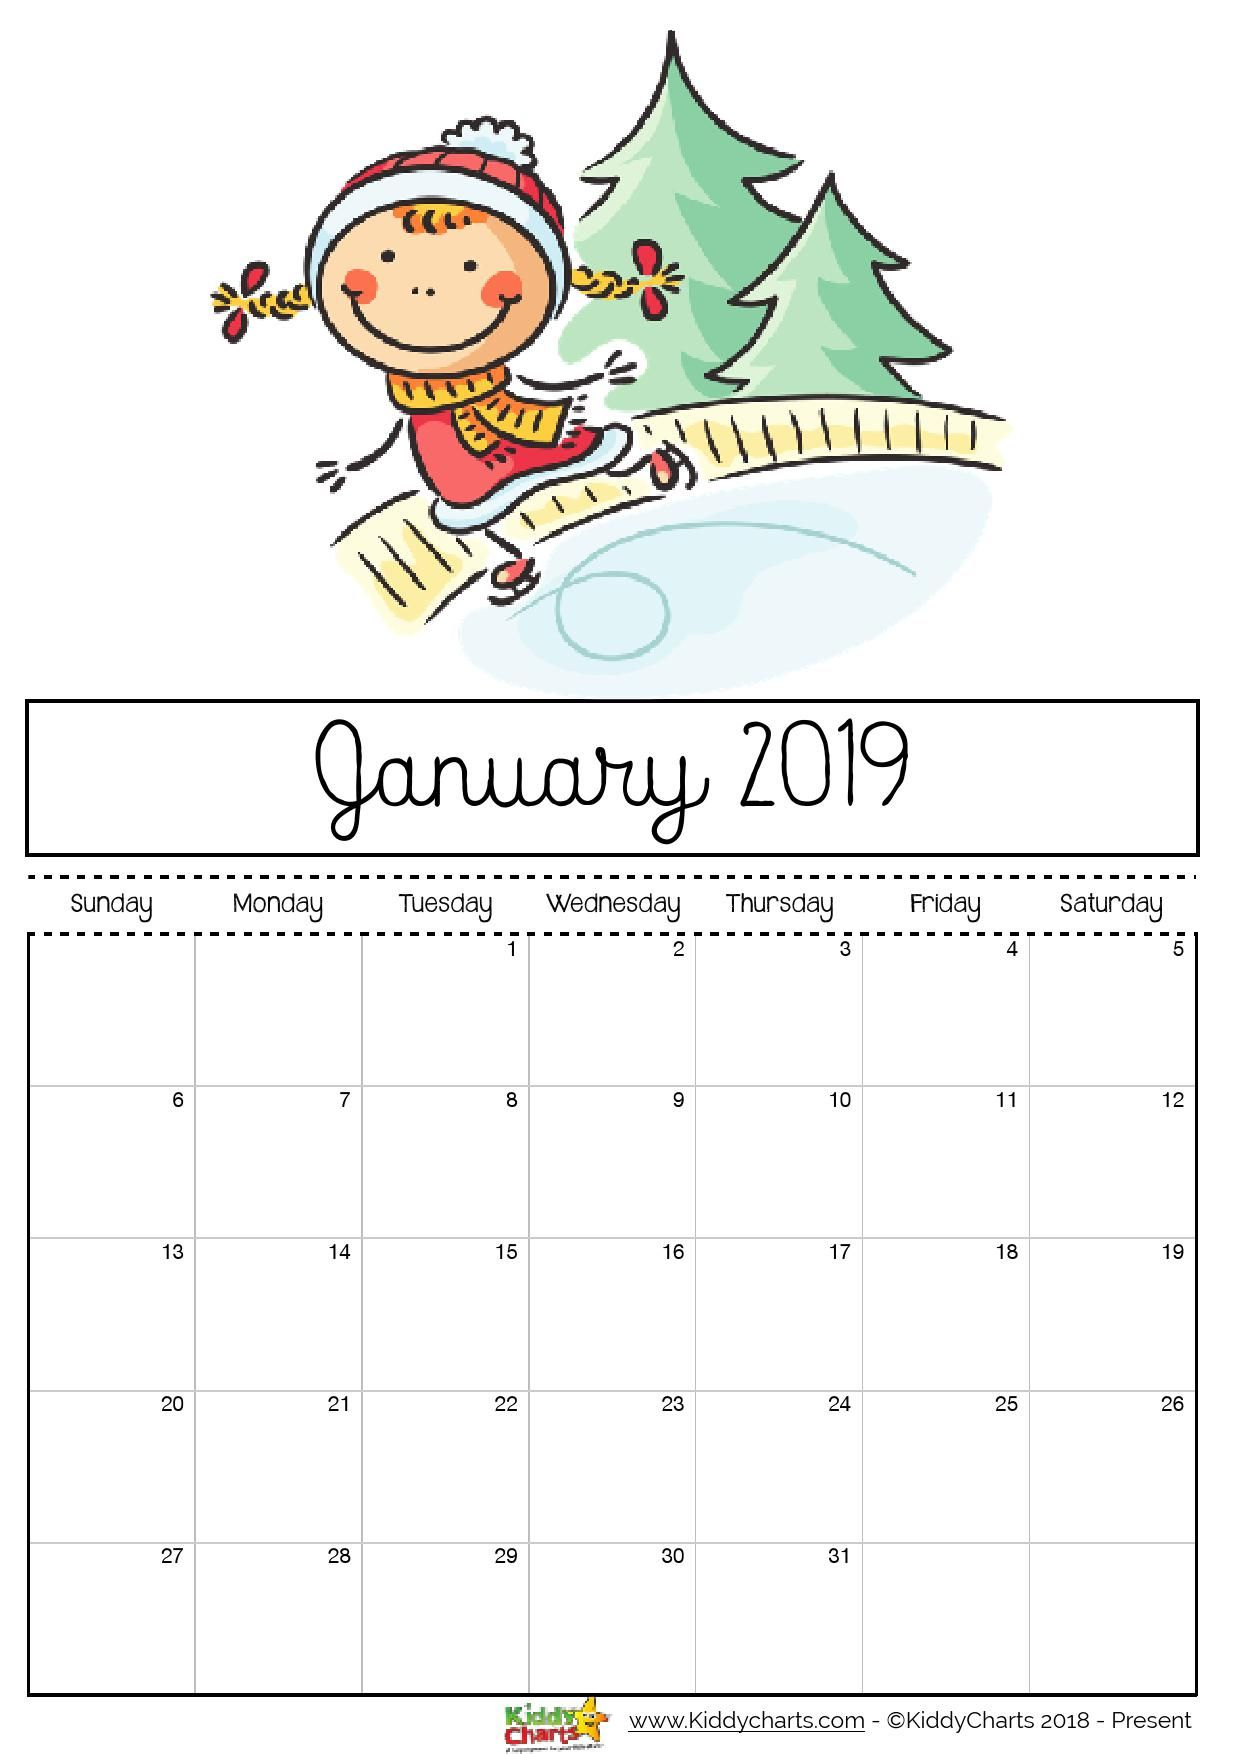 Check Out Our Fantastic Free 2019 Calendar For Your Child&#039;s